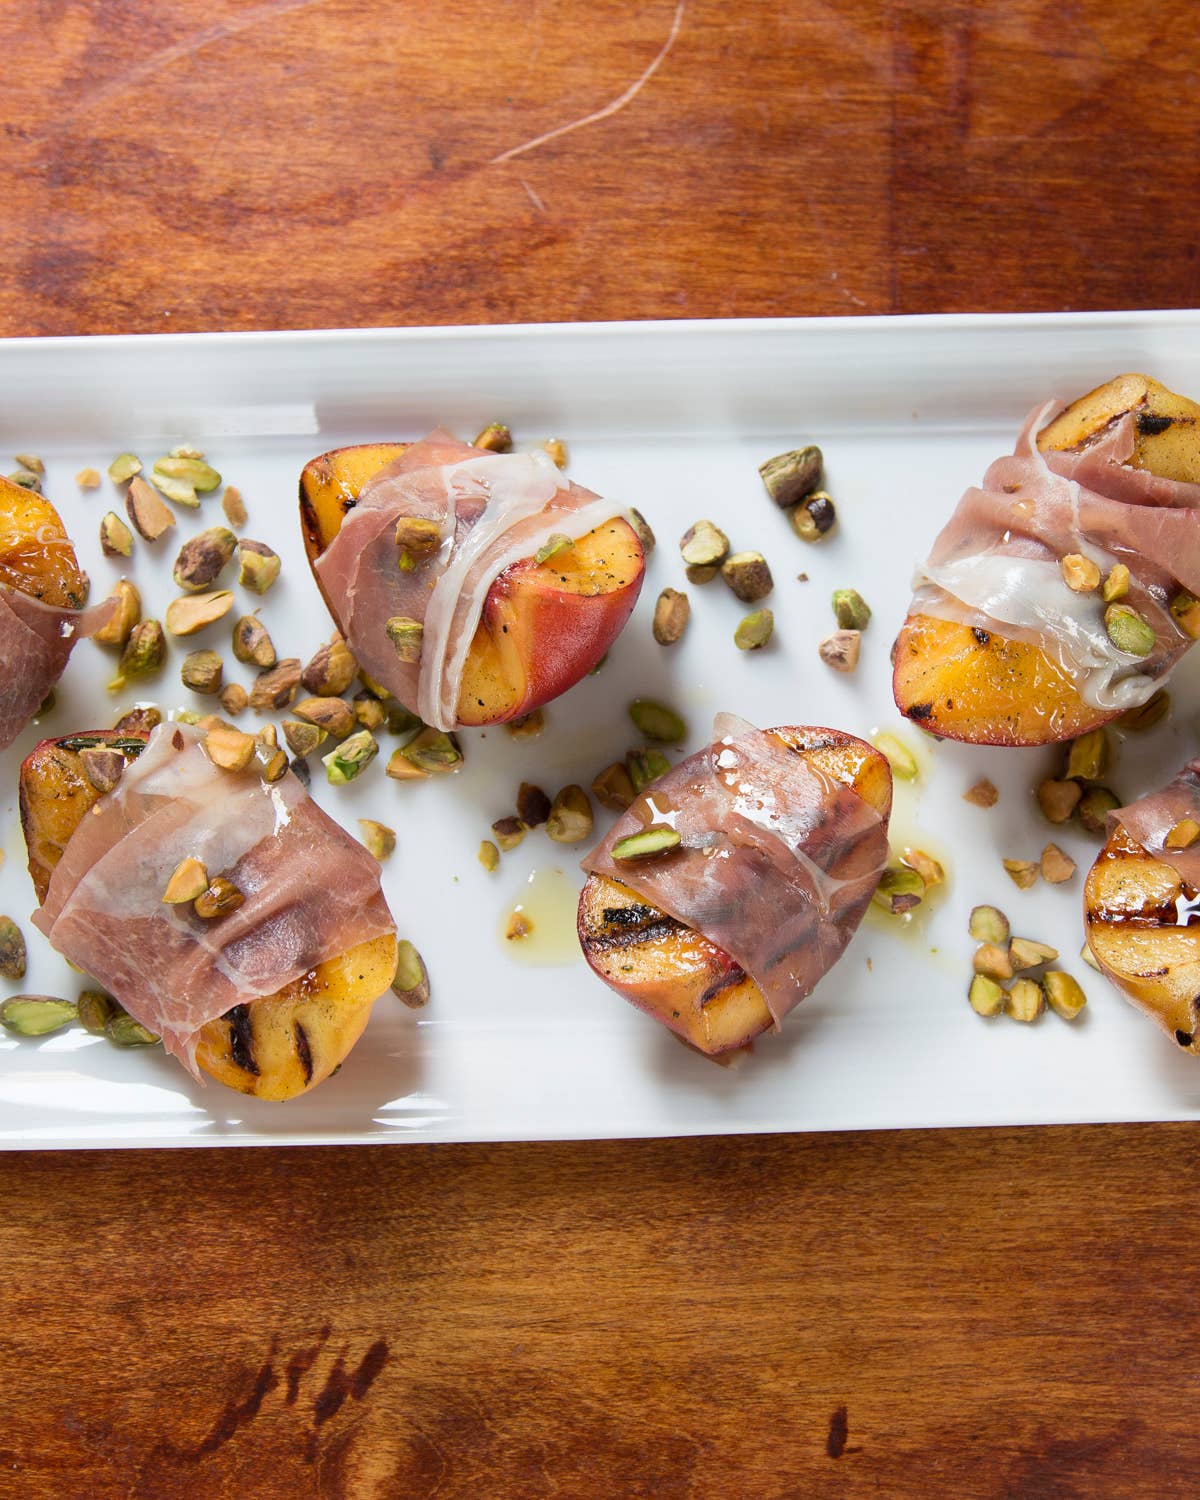 Grilled Peach with Rosemary, Smoked Country Ham, and Toasted Pistachios